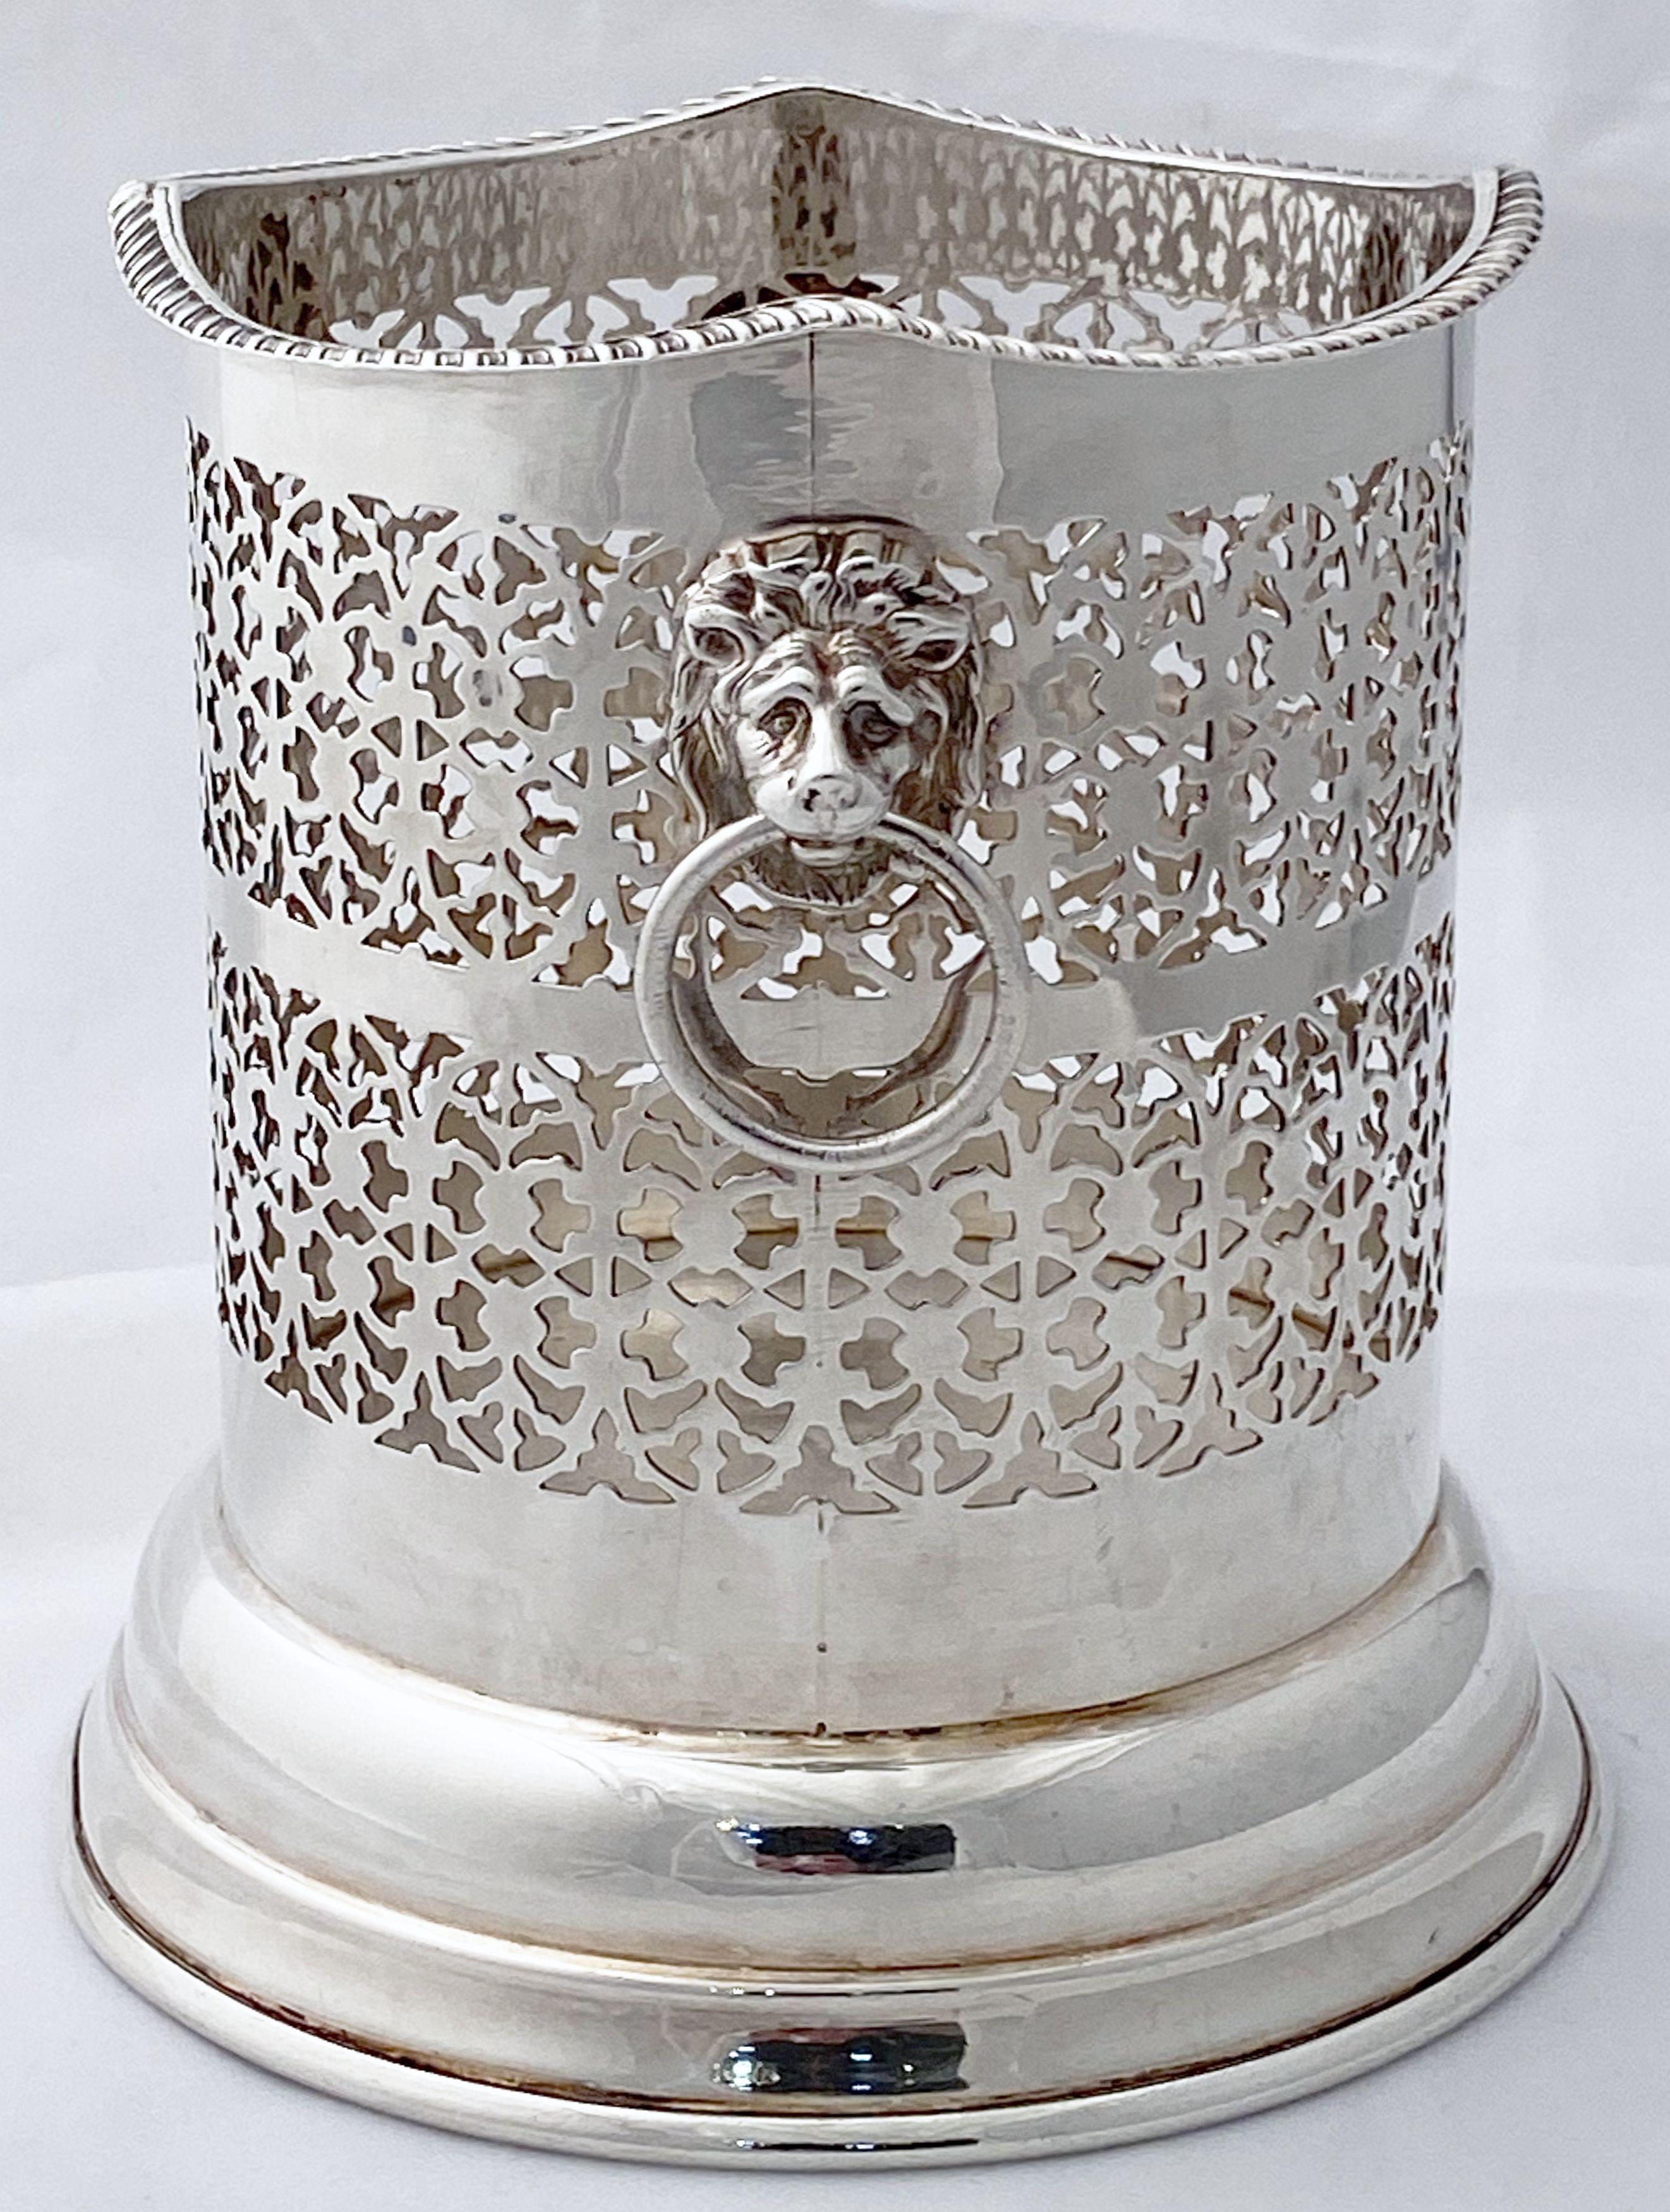 A handsome English wine bottle display holder or coaster of fine plate silver, featuring a pierced design around the circumference and opposing Regency lion ring pull handles, with serpentine edge around the top.

Designed to add a fine level of